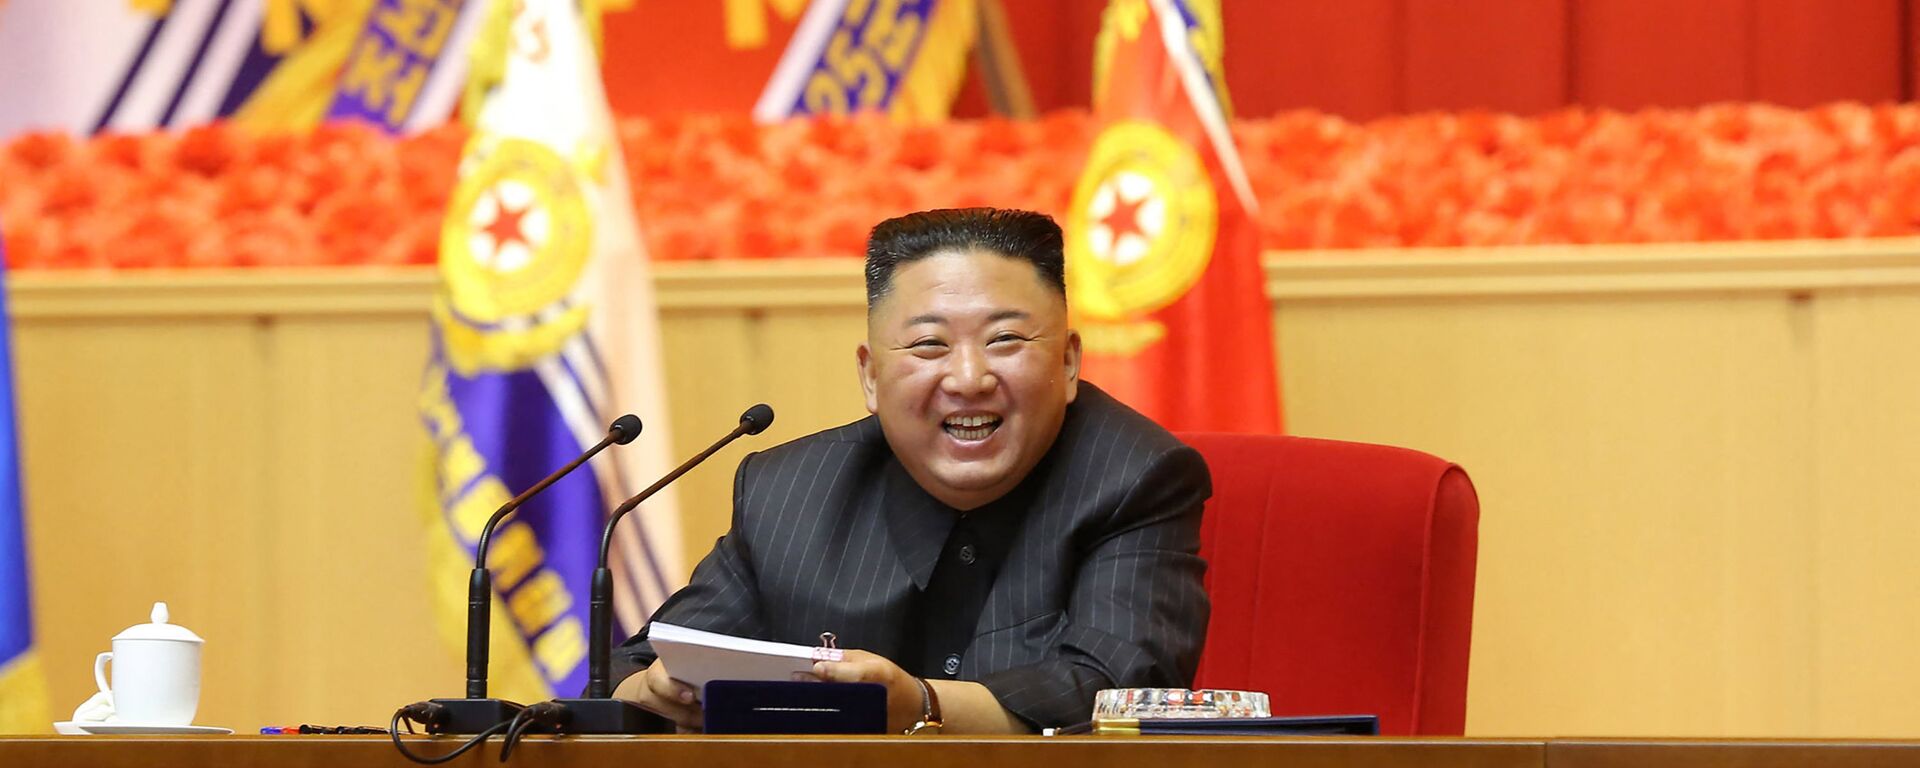 This undated picture released from North Korea's official Korean Central News Agency (KCNA) on July 30, 2021 shows North Korean leader Kim Jong Un taking part in the First Workshop of KPA Commanders and Political Officers, at April 25 House of Culture in Pyongyang. - Sputnik International, 1920, 03.08.2021